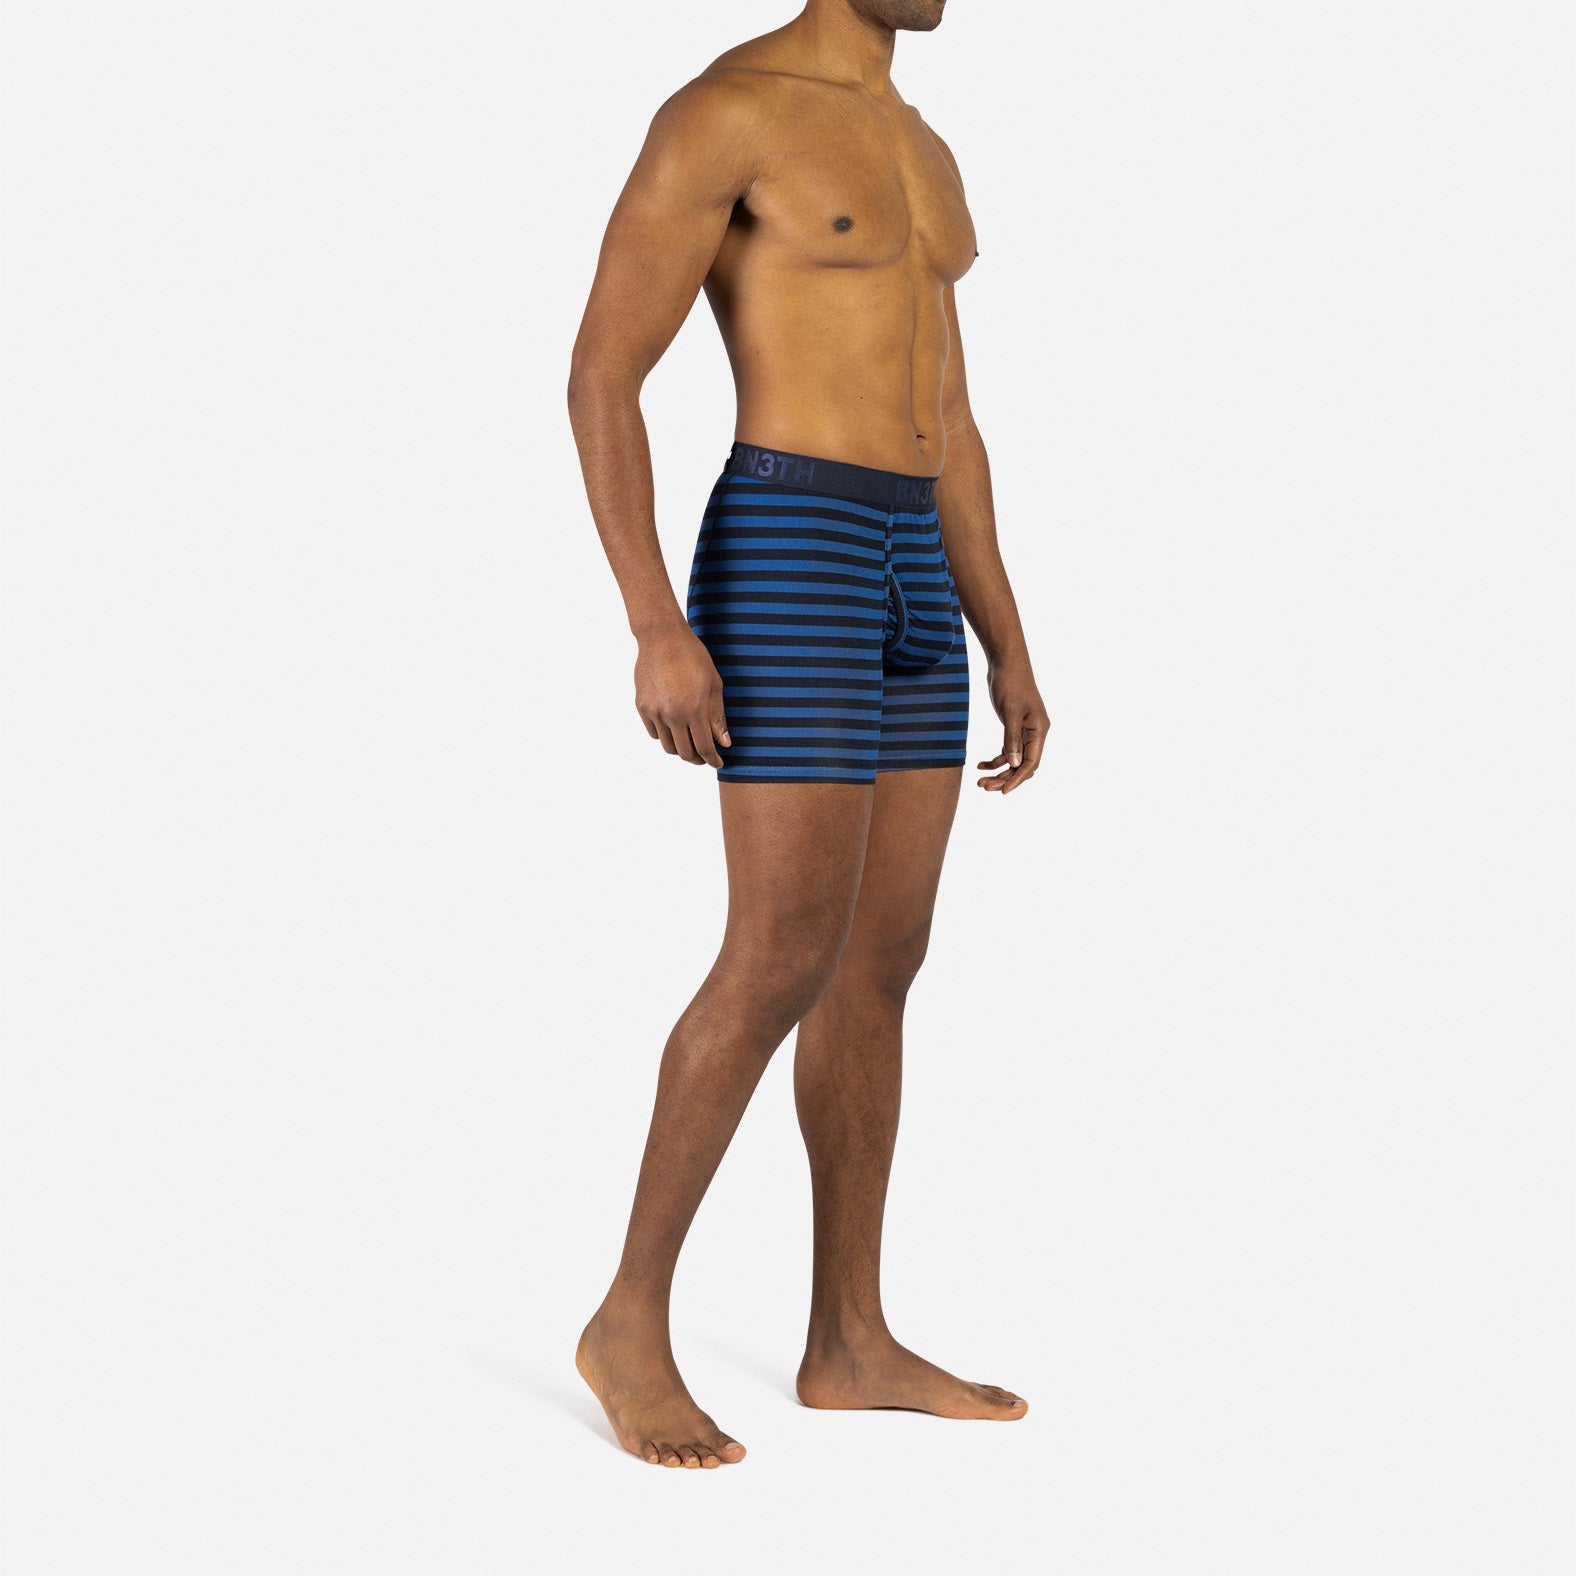 CLASSIC BOXER BRIEF WITH FLY: NAVY/TRADITIONAL STRIPE QUARTZ 2 PACK